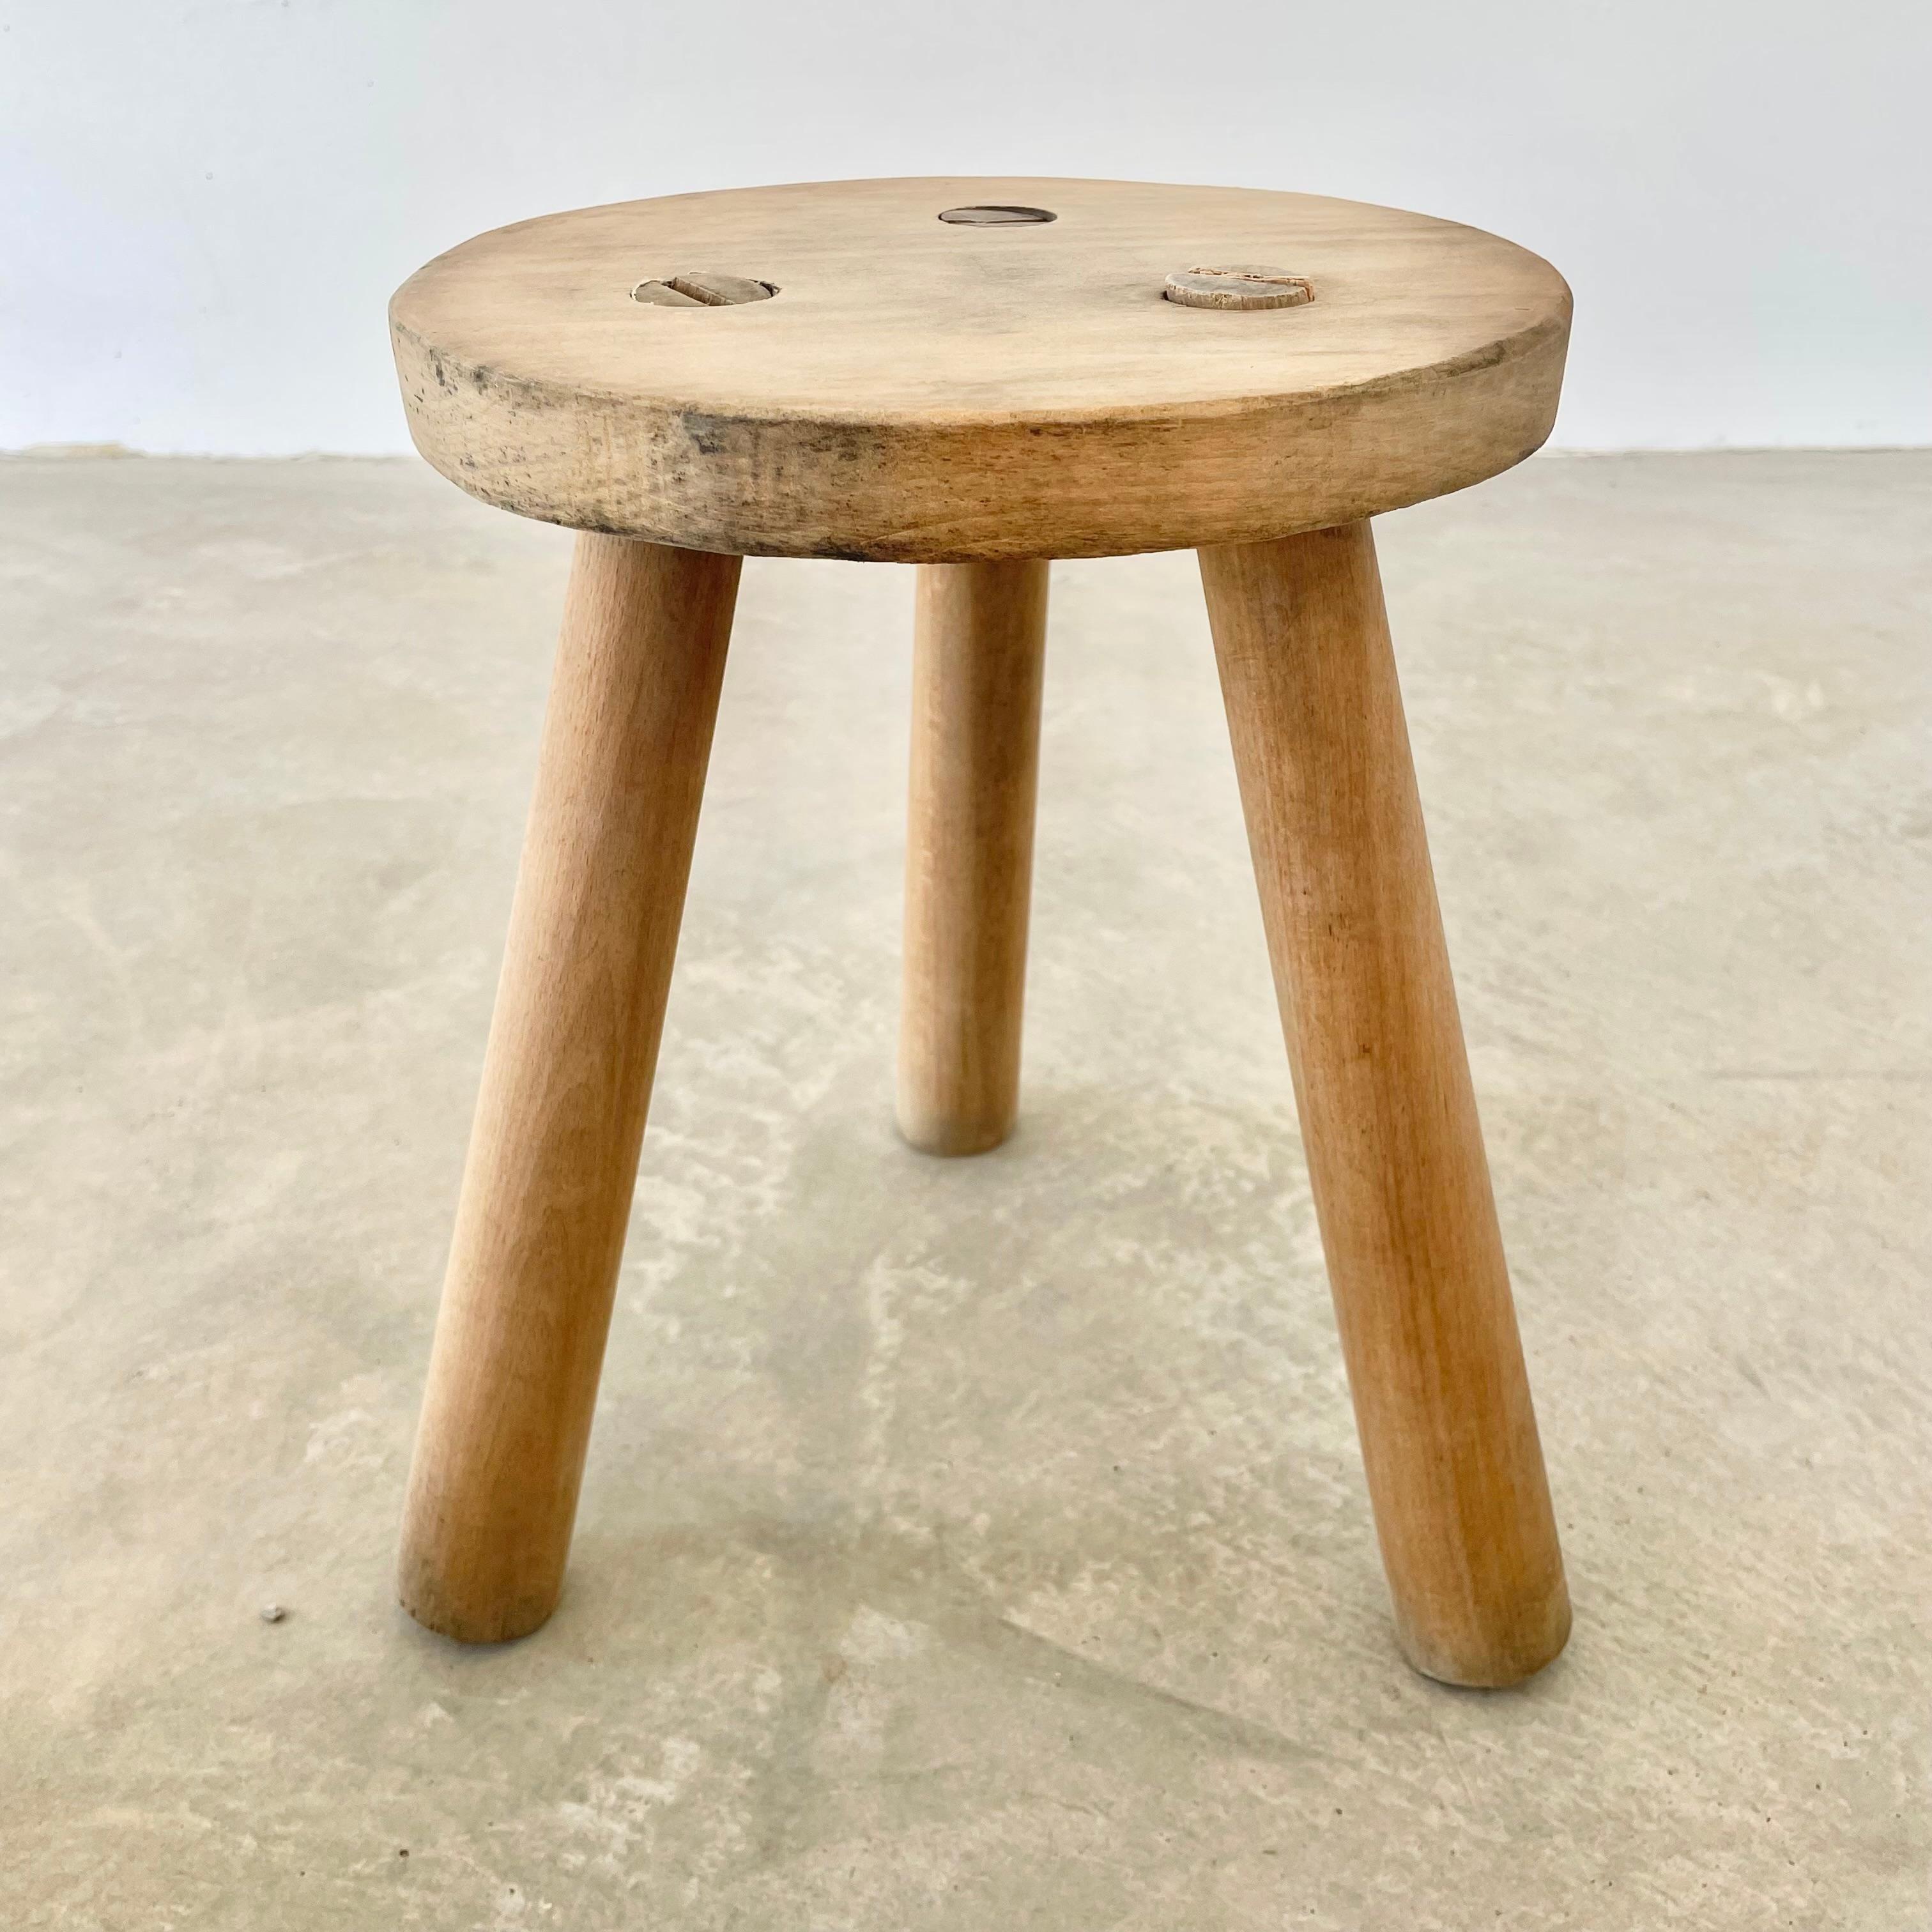 Tripod stool made in France, circa 1970s with a light wood with a raw finish. Great minimalist design. Functional stool. Perfect for books or objects as well. Seat diameter 13